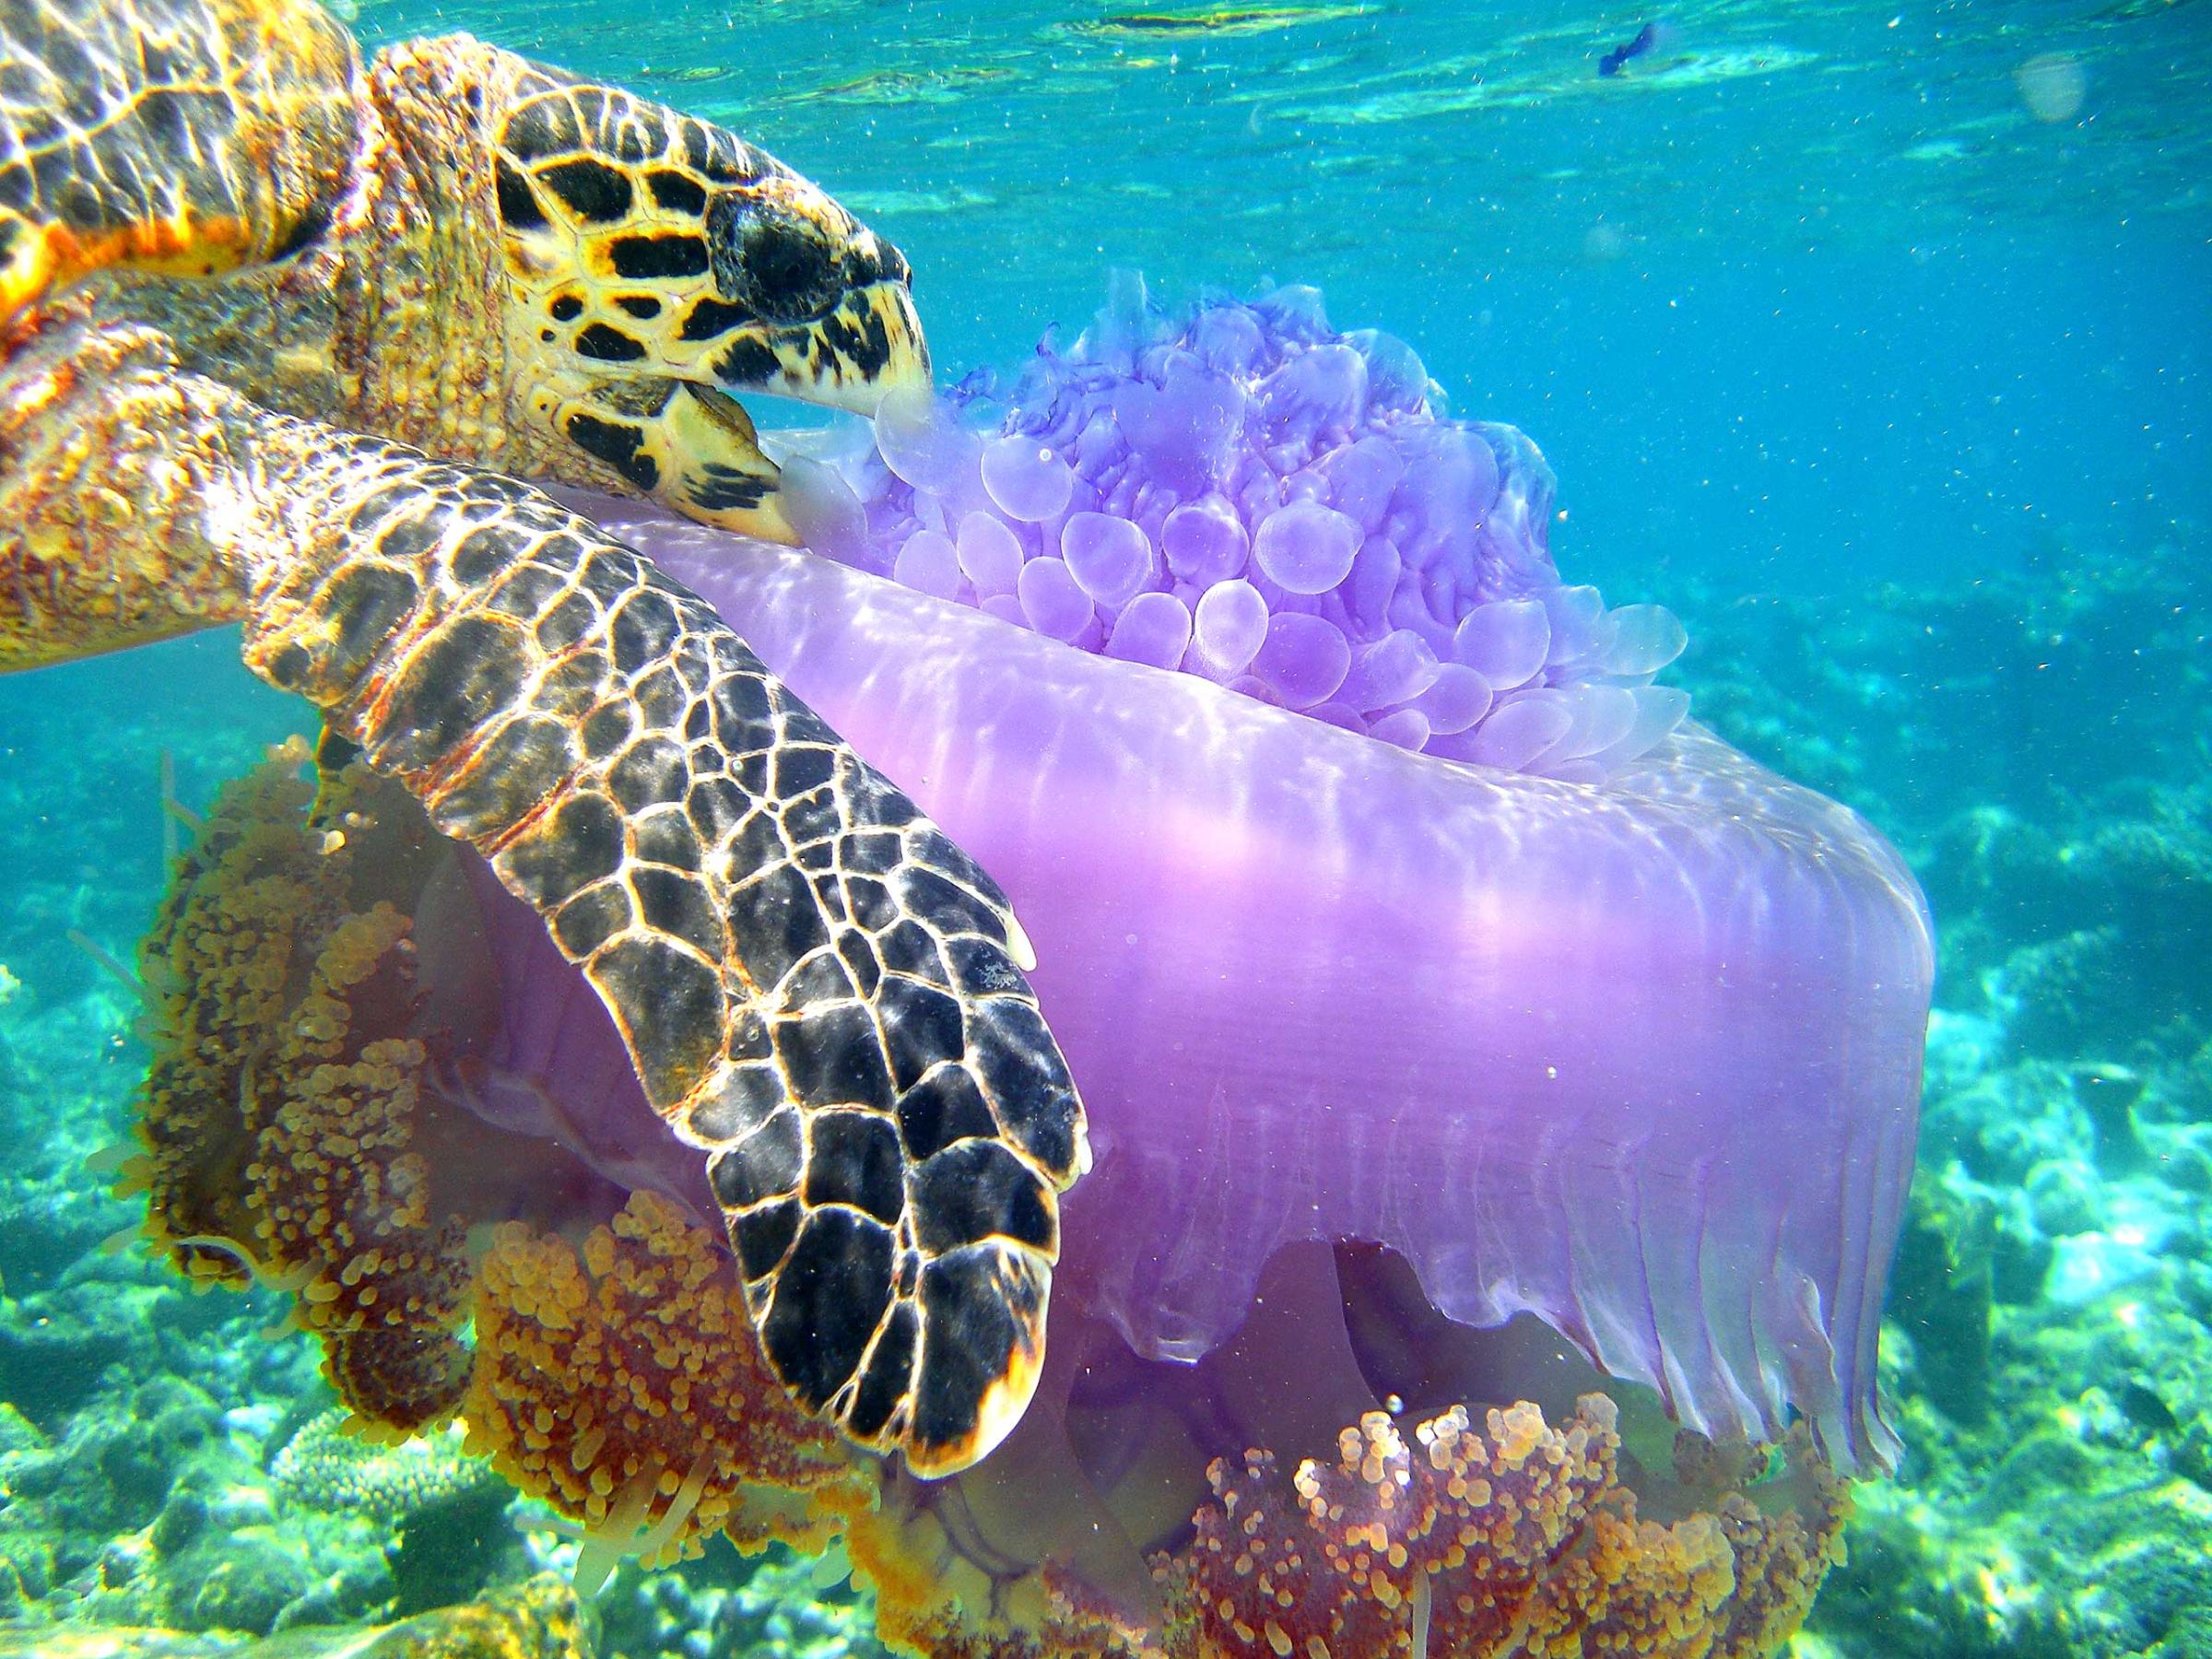 A sea turtle eating a jellyfish in The Maldives.